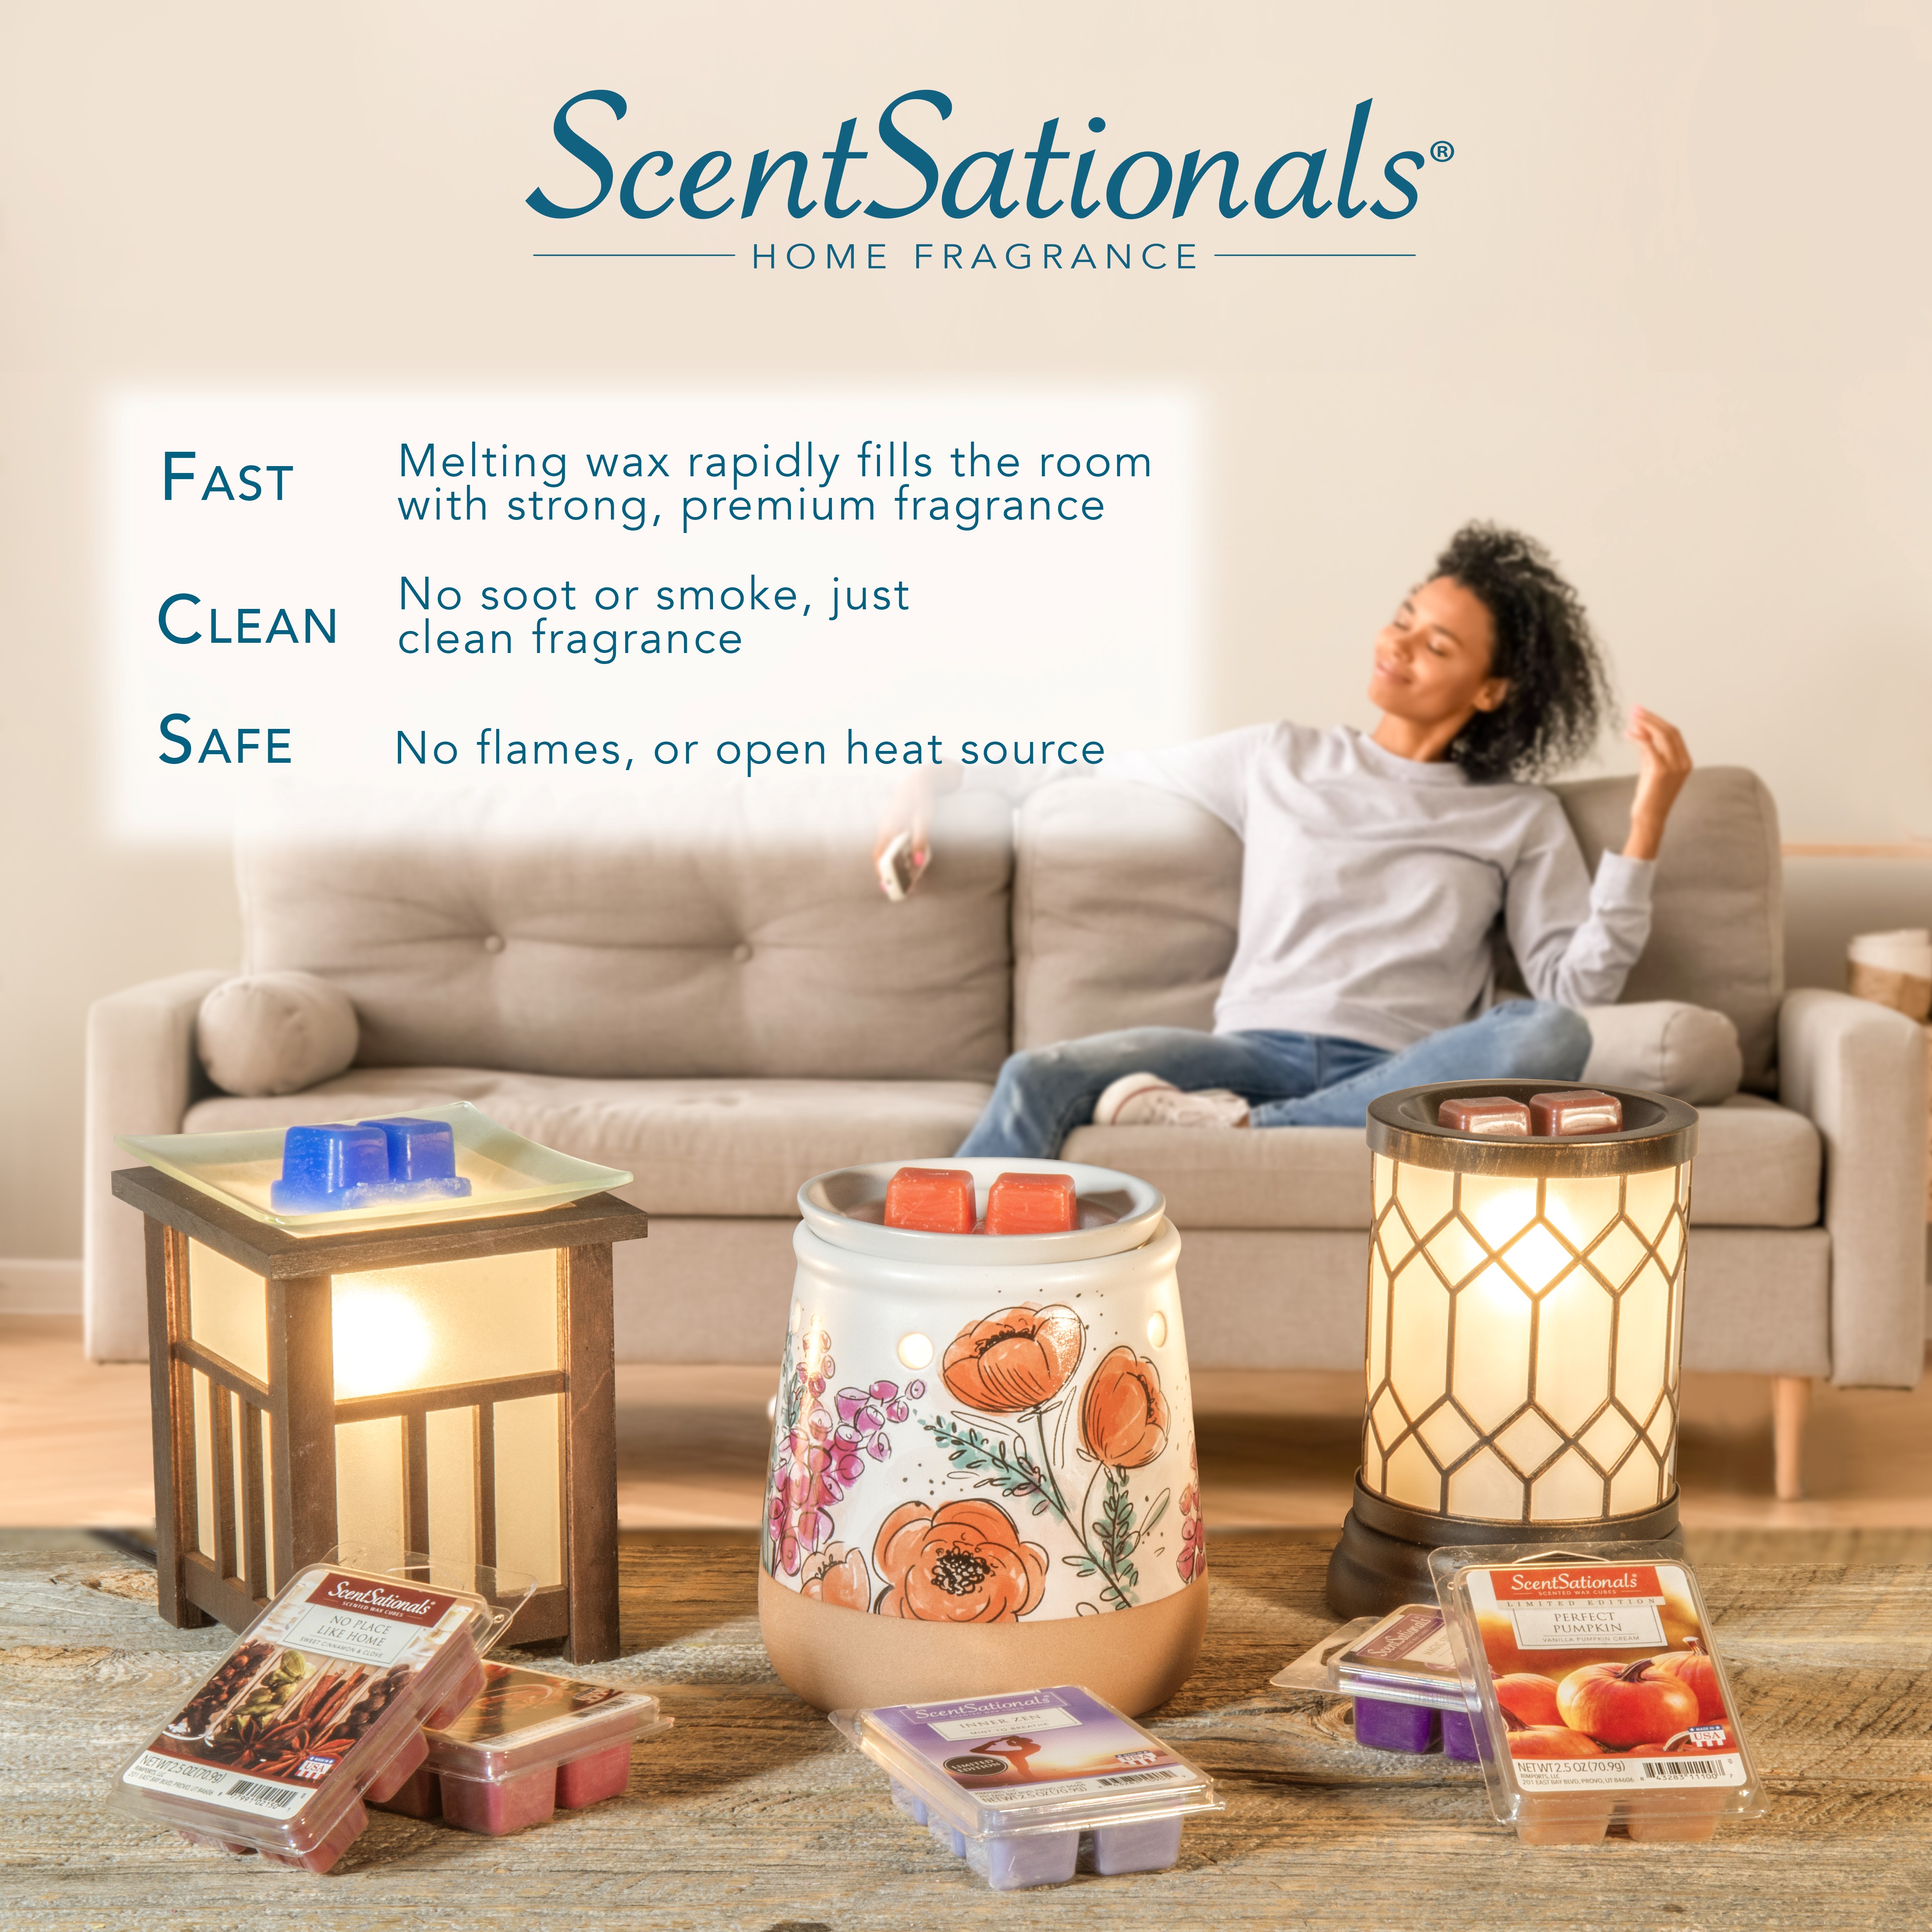 ScentSationals Charleston Full-Size Scented Wax Warmer - image 4 of 8